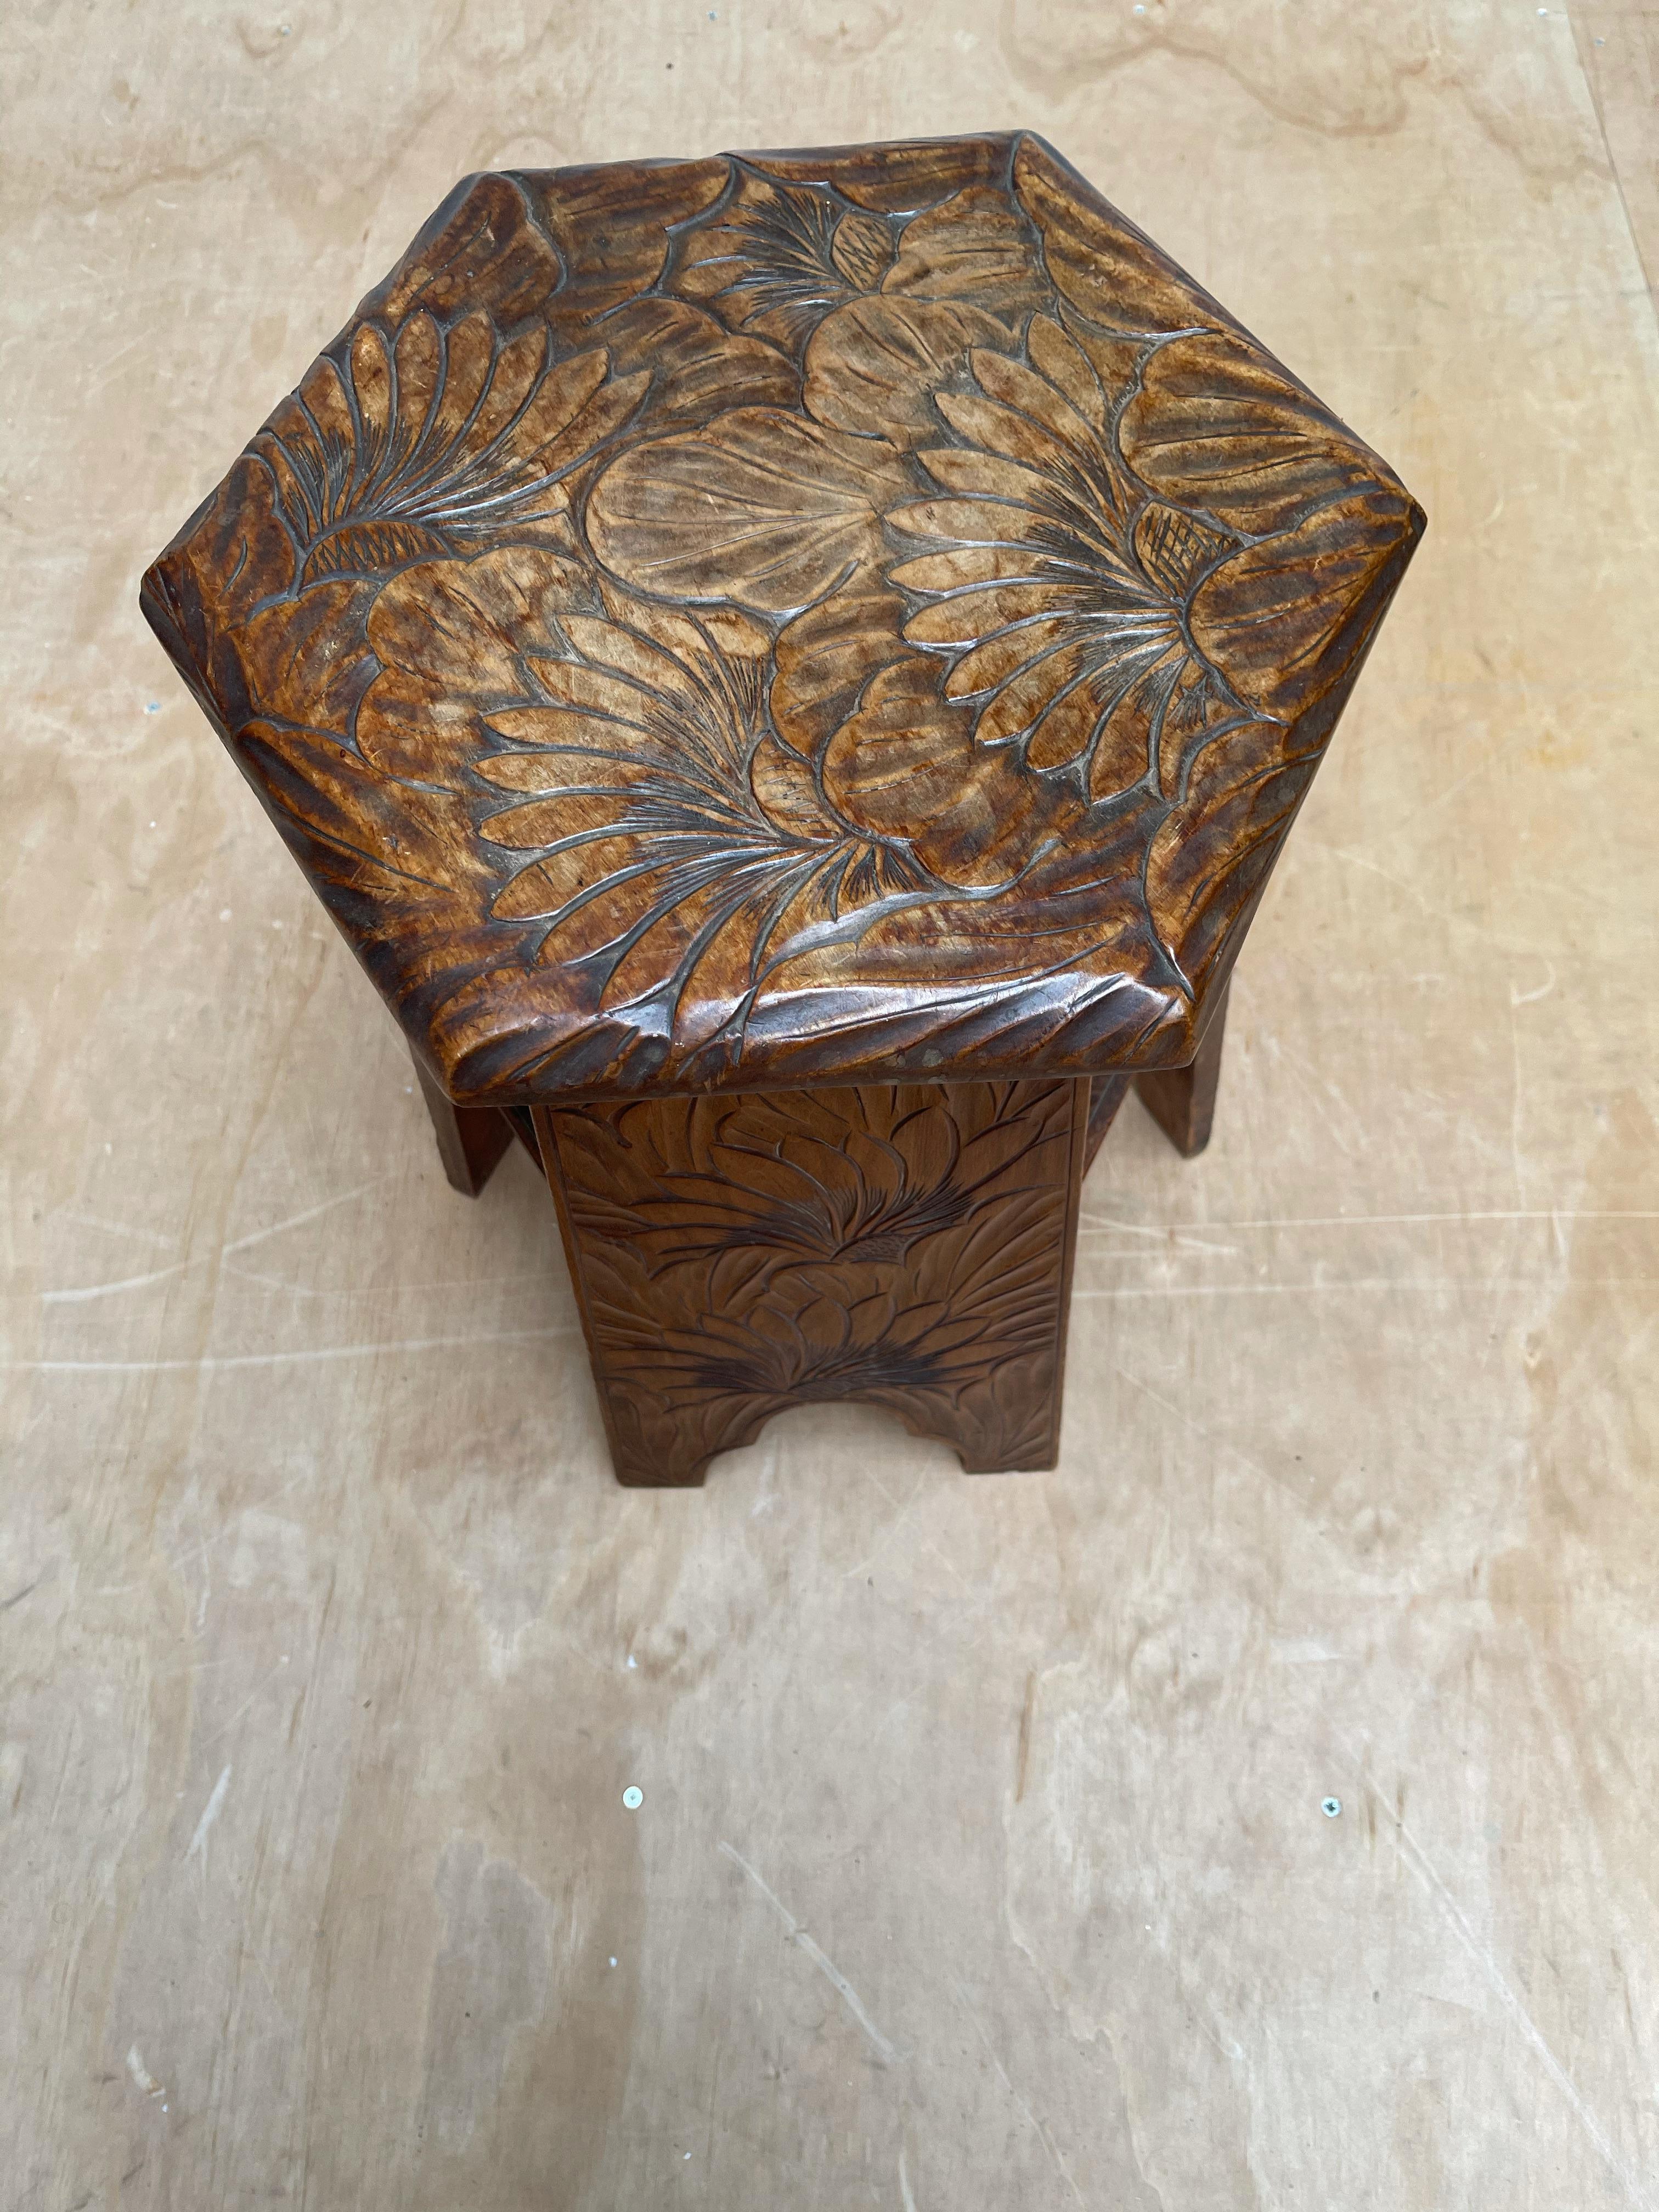 All handcrafted antique end table with a wonderful patina.

If you are a collector of beautifully handcrafted and stylish pieces from the Arts & Crafts era then you will love this sculptural table. Both the shape of the table itself is and the hand